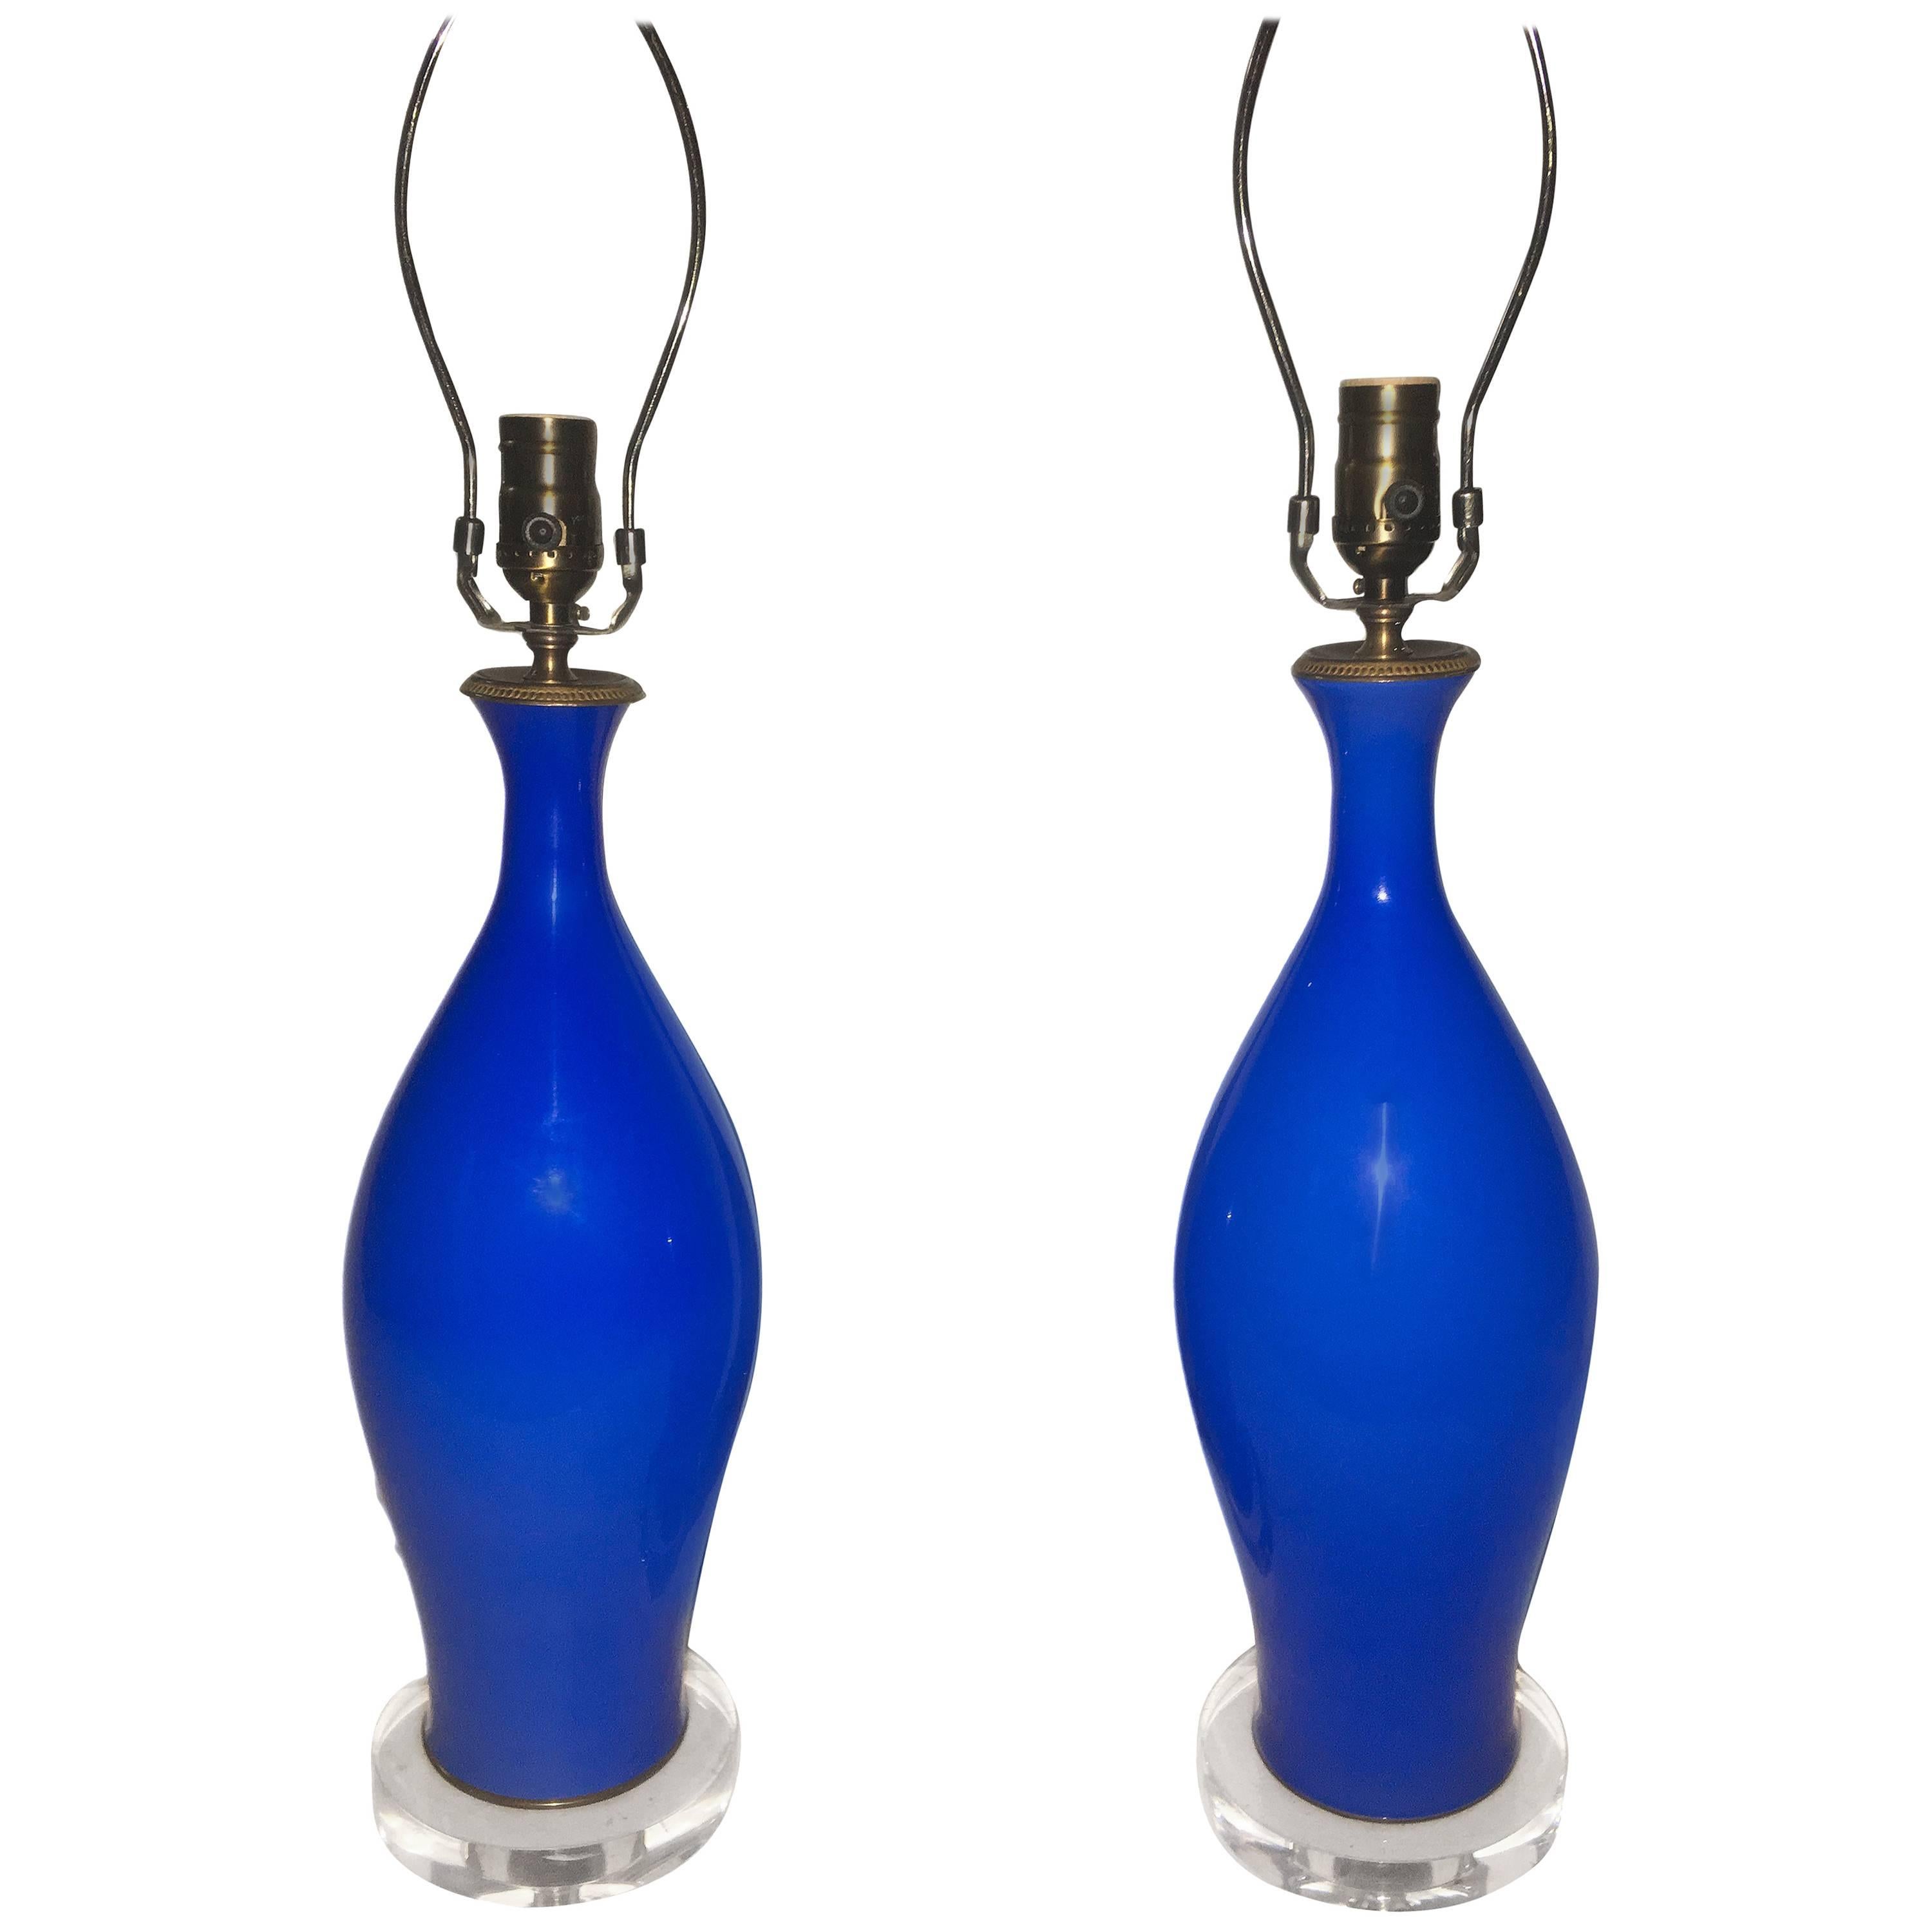 Pair of circa 1960’s Italian blue opaline table lamps with lucite bases.

Measurements:
Height of body: 18